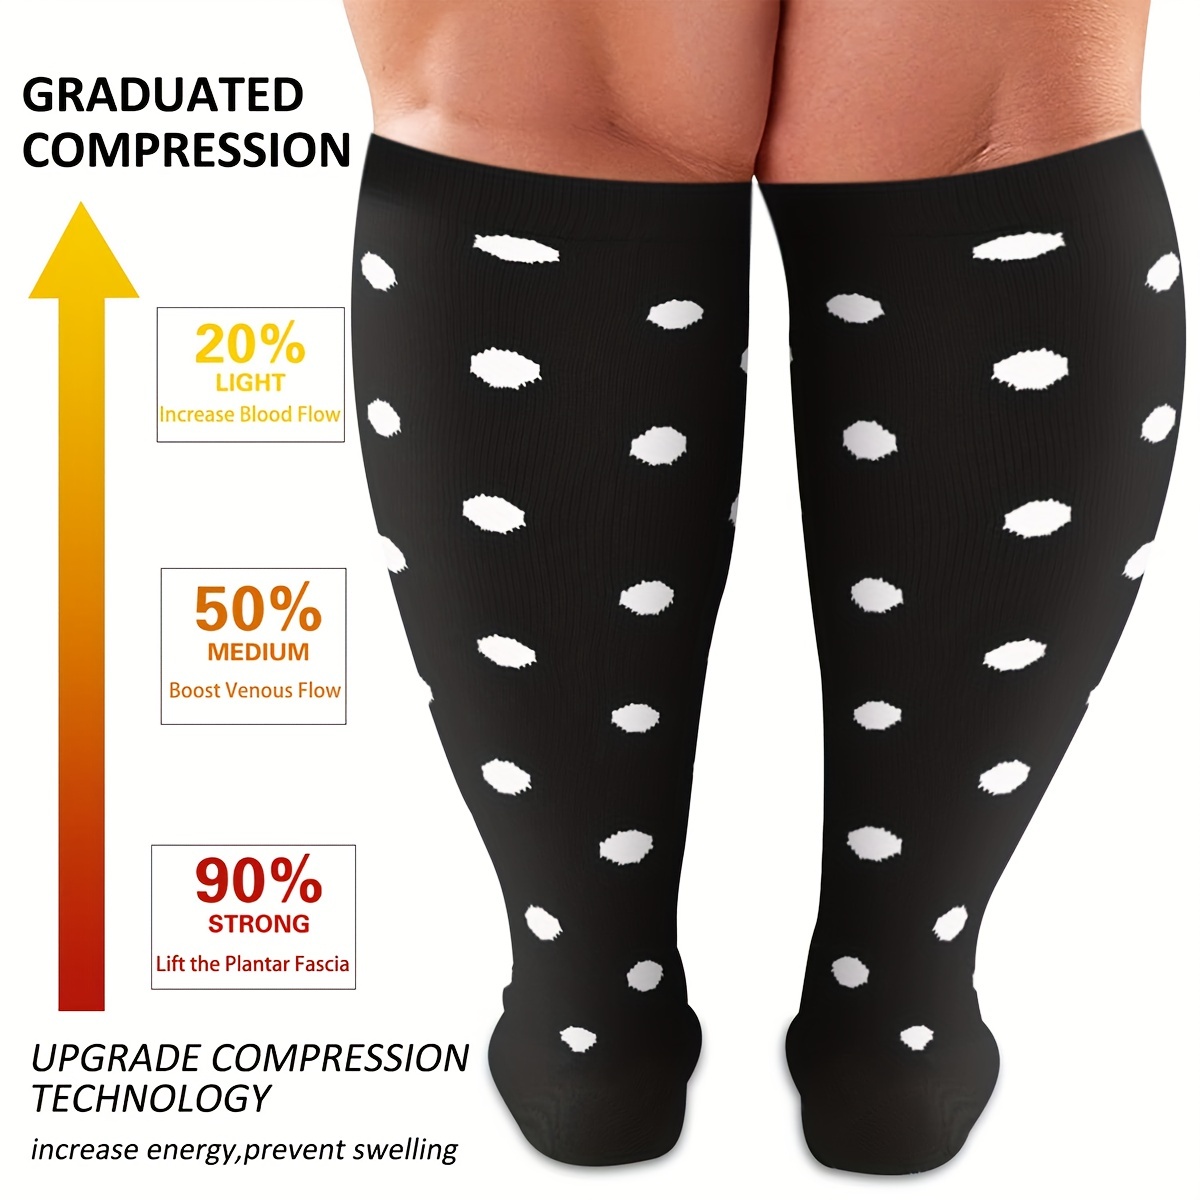 Plus Size Compression Products For Women - Compression Health